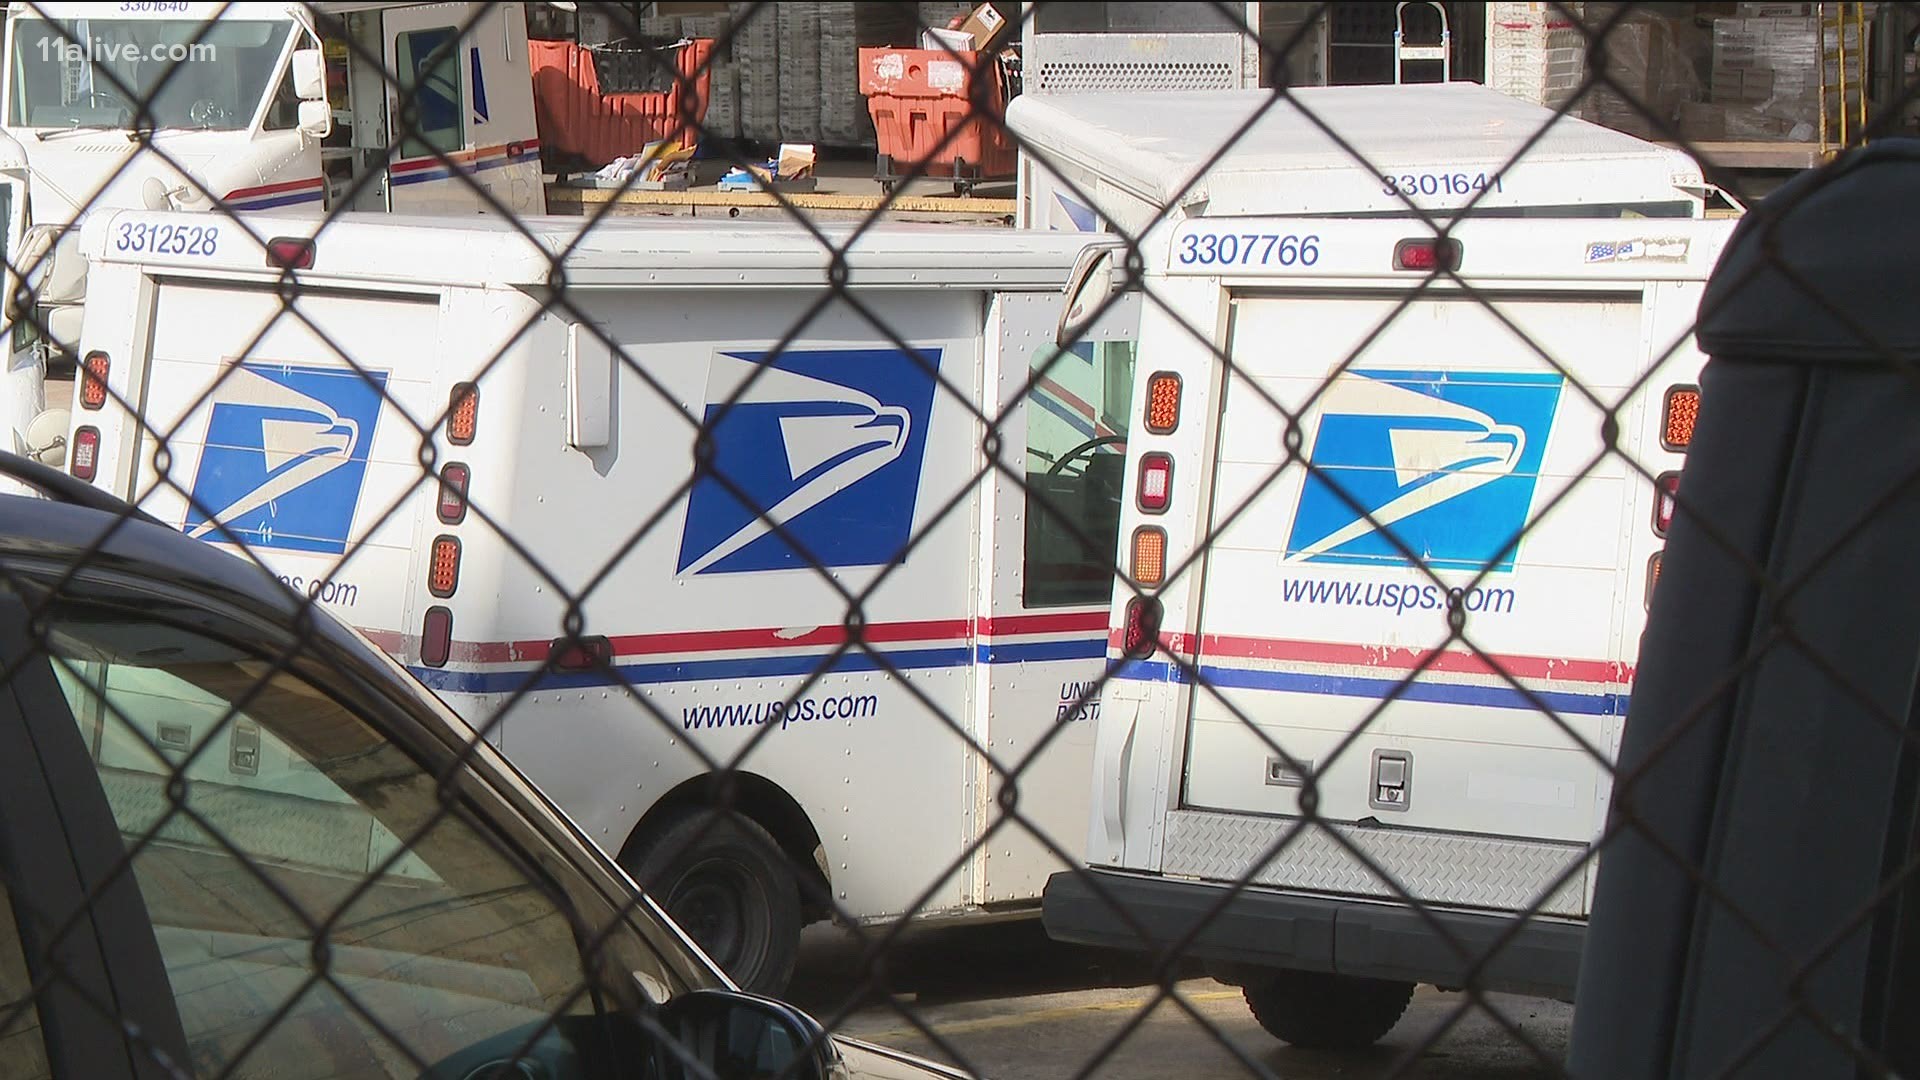 Residents said their mail delivery stopped in December, and they want to know why - or when it could resume.